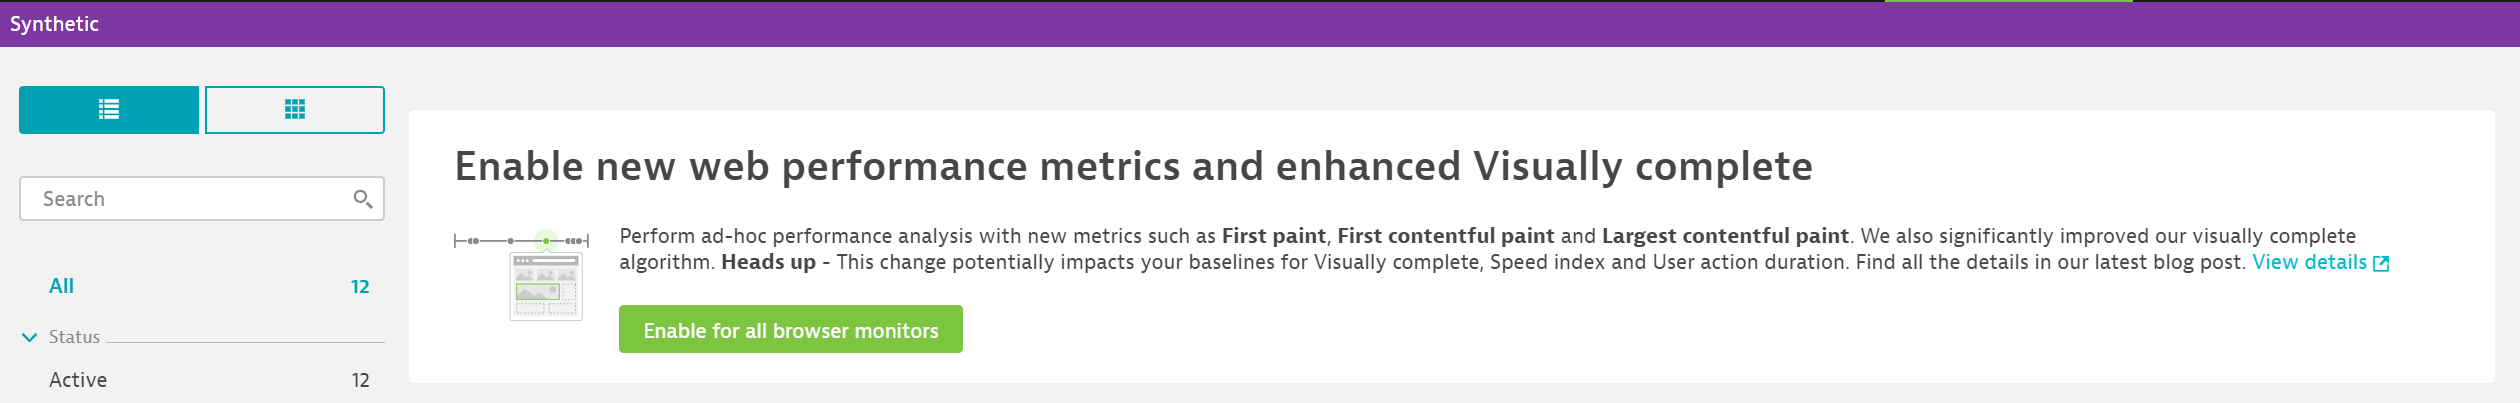 Enable to new web performance metrics from the Synthetic monitors page